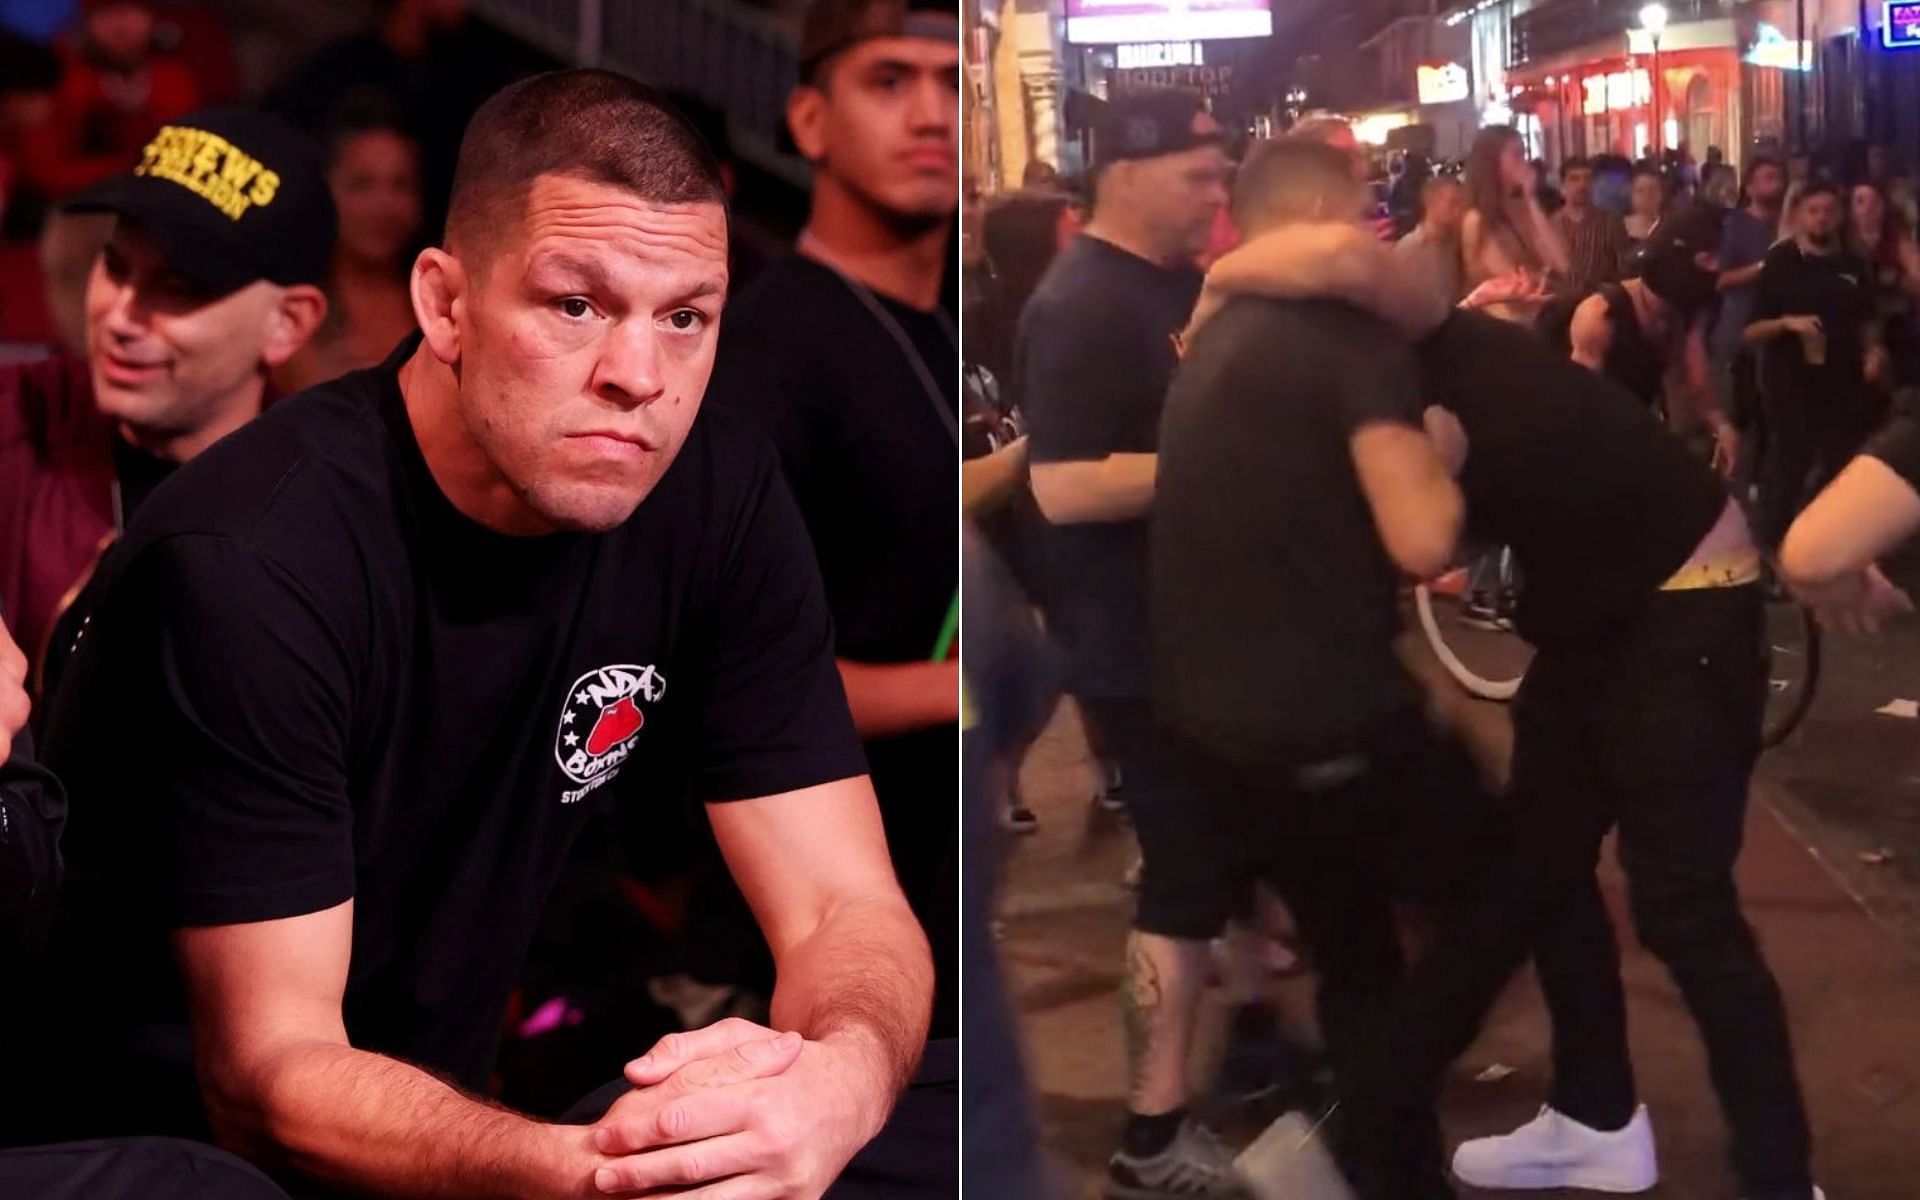 Nate Diaz [Left], and Nate Diaz altercation [Right] [Photo credit: MMAFighting - Twitter]